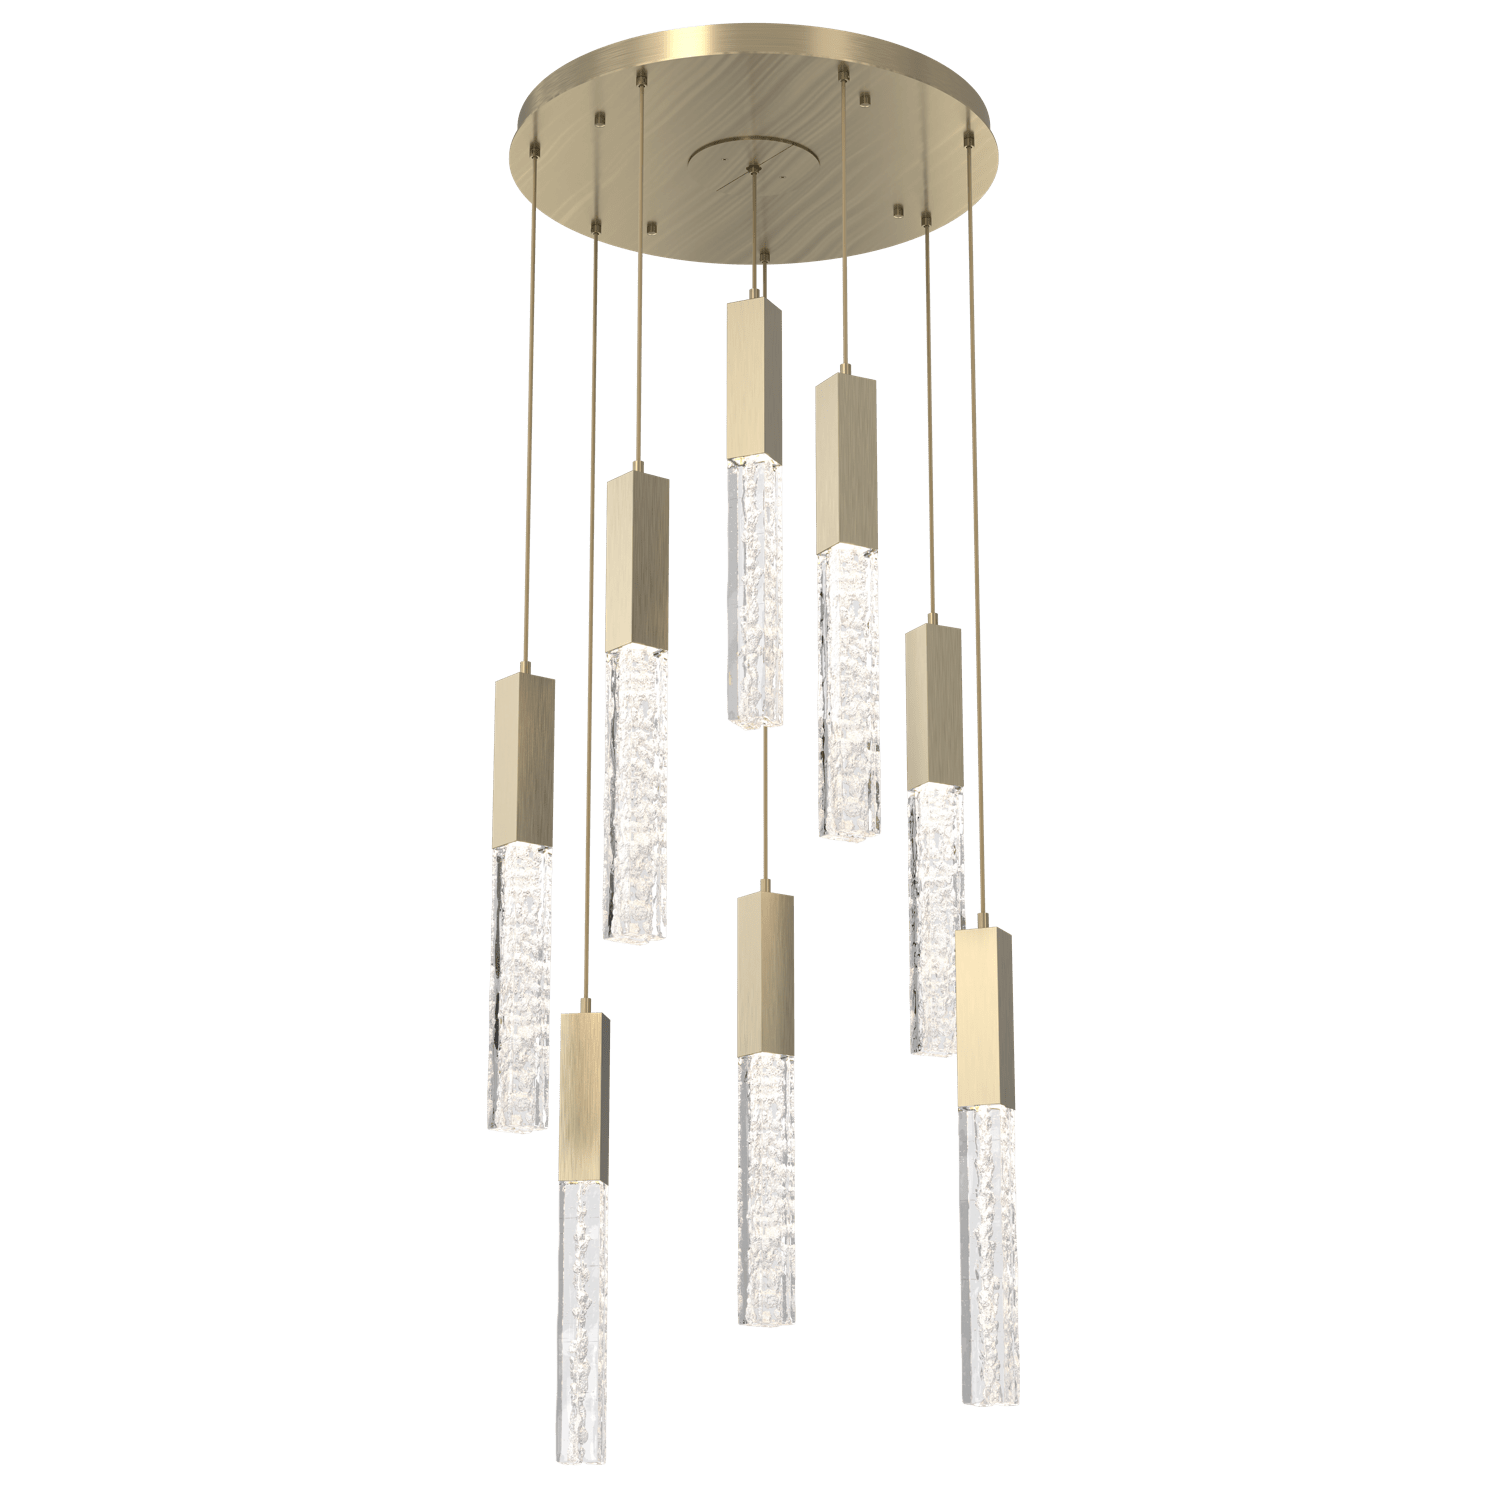 CHB0060-08-HB-GC-Hammerton-Studio-Axis-8-Light-Pendant-Chandelier-with-Heritage-Brass-finish-and-clear-cast-glass-and-LED-lamping